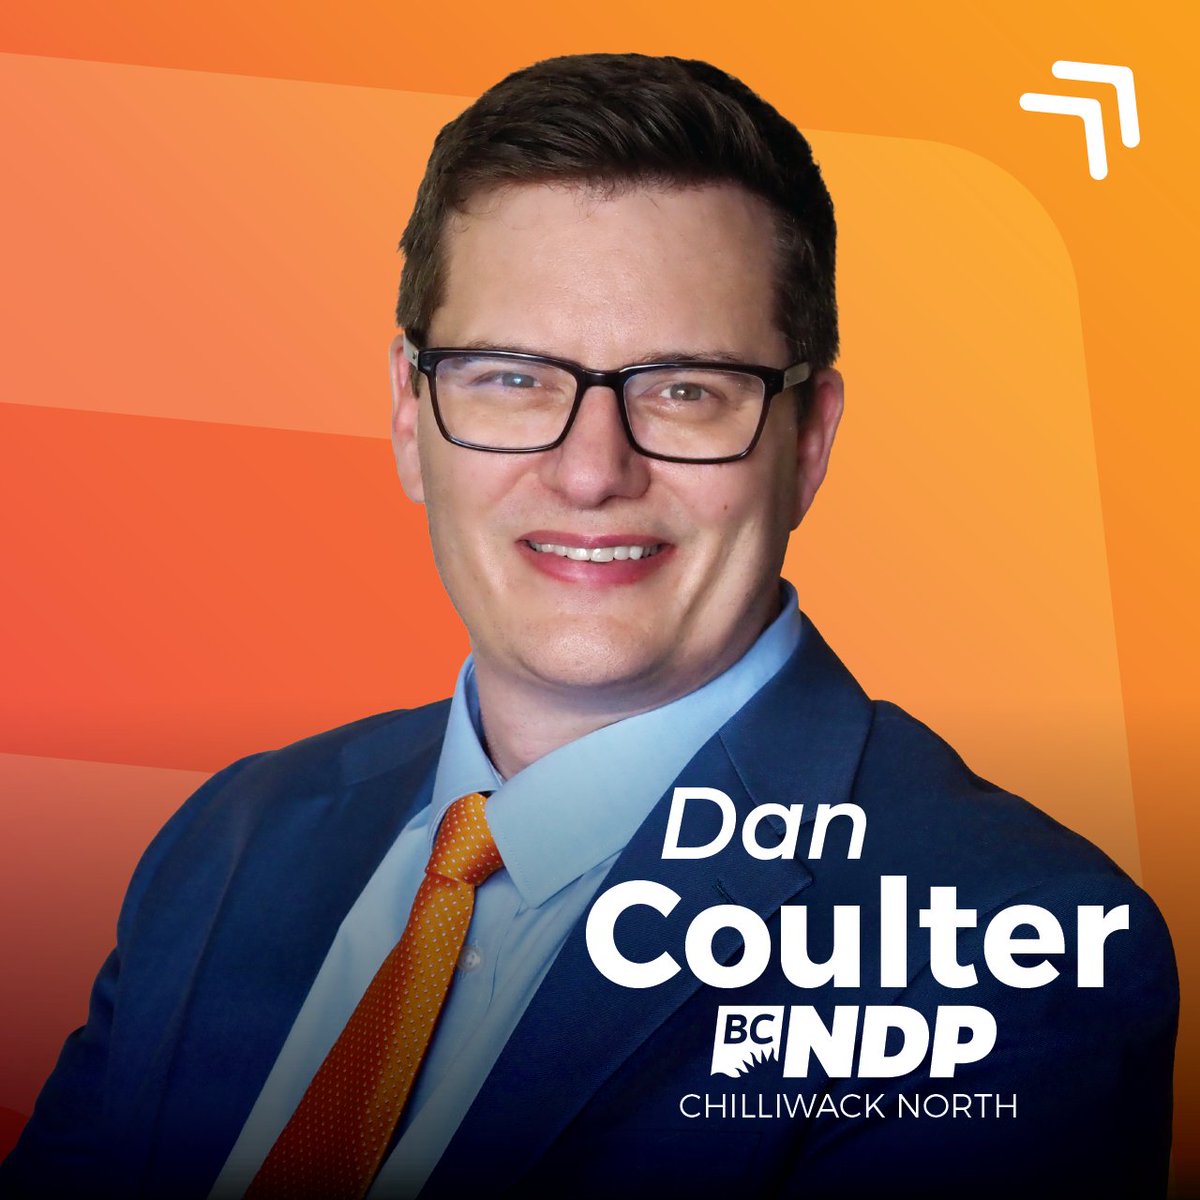 Please join us in welcoming Dan Coulter as our BC NDP candidate in Chilliwack North. Past Chair of the Chilliwack Board of Education, Dan was elected as the MLA for Chilliwack in 2020 and serves as the Minister of State for Infrastructure and Transit. Welcome @dacoulter!